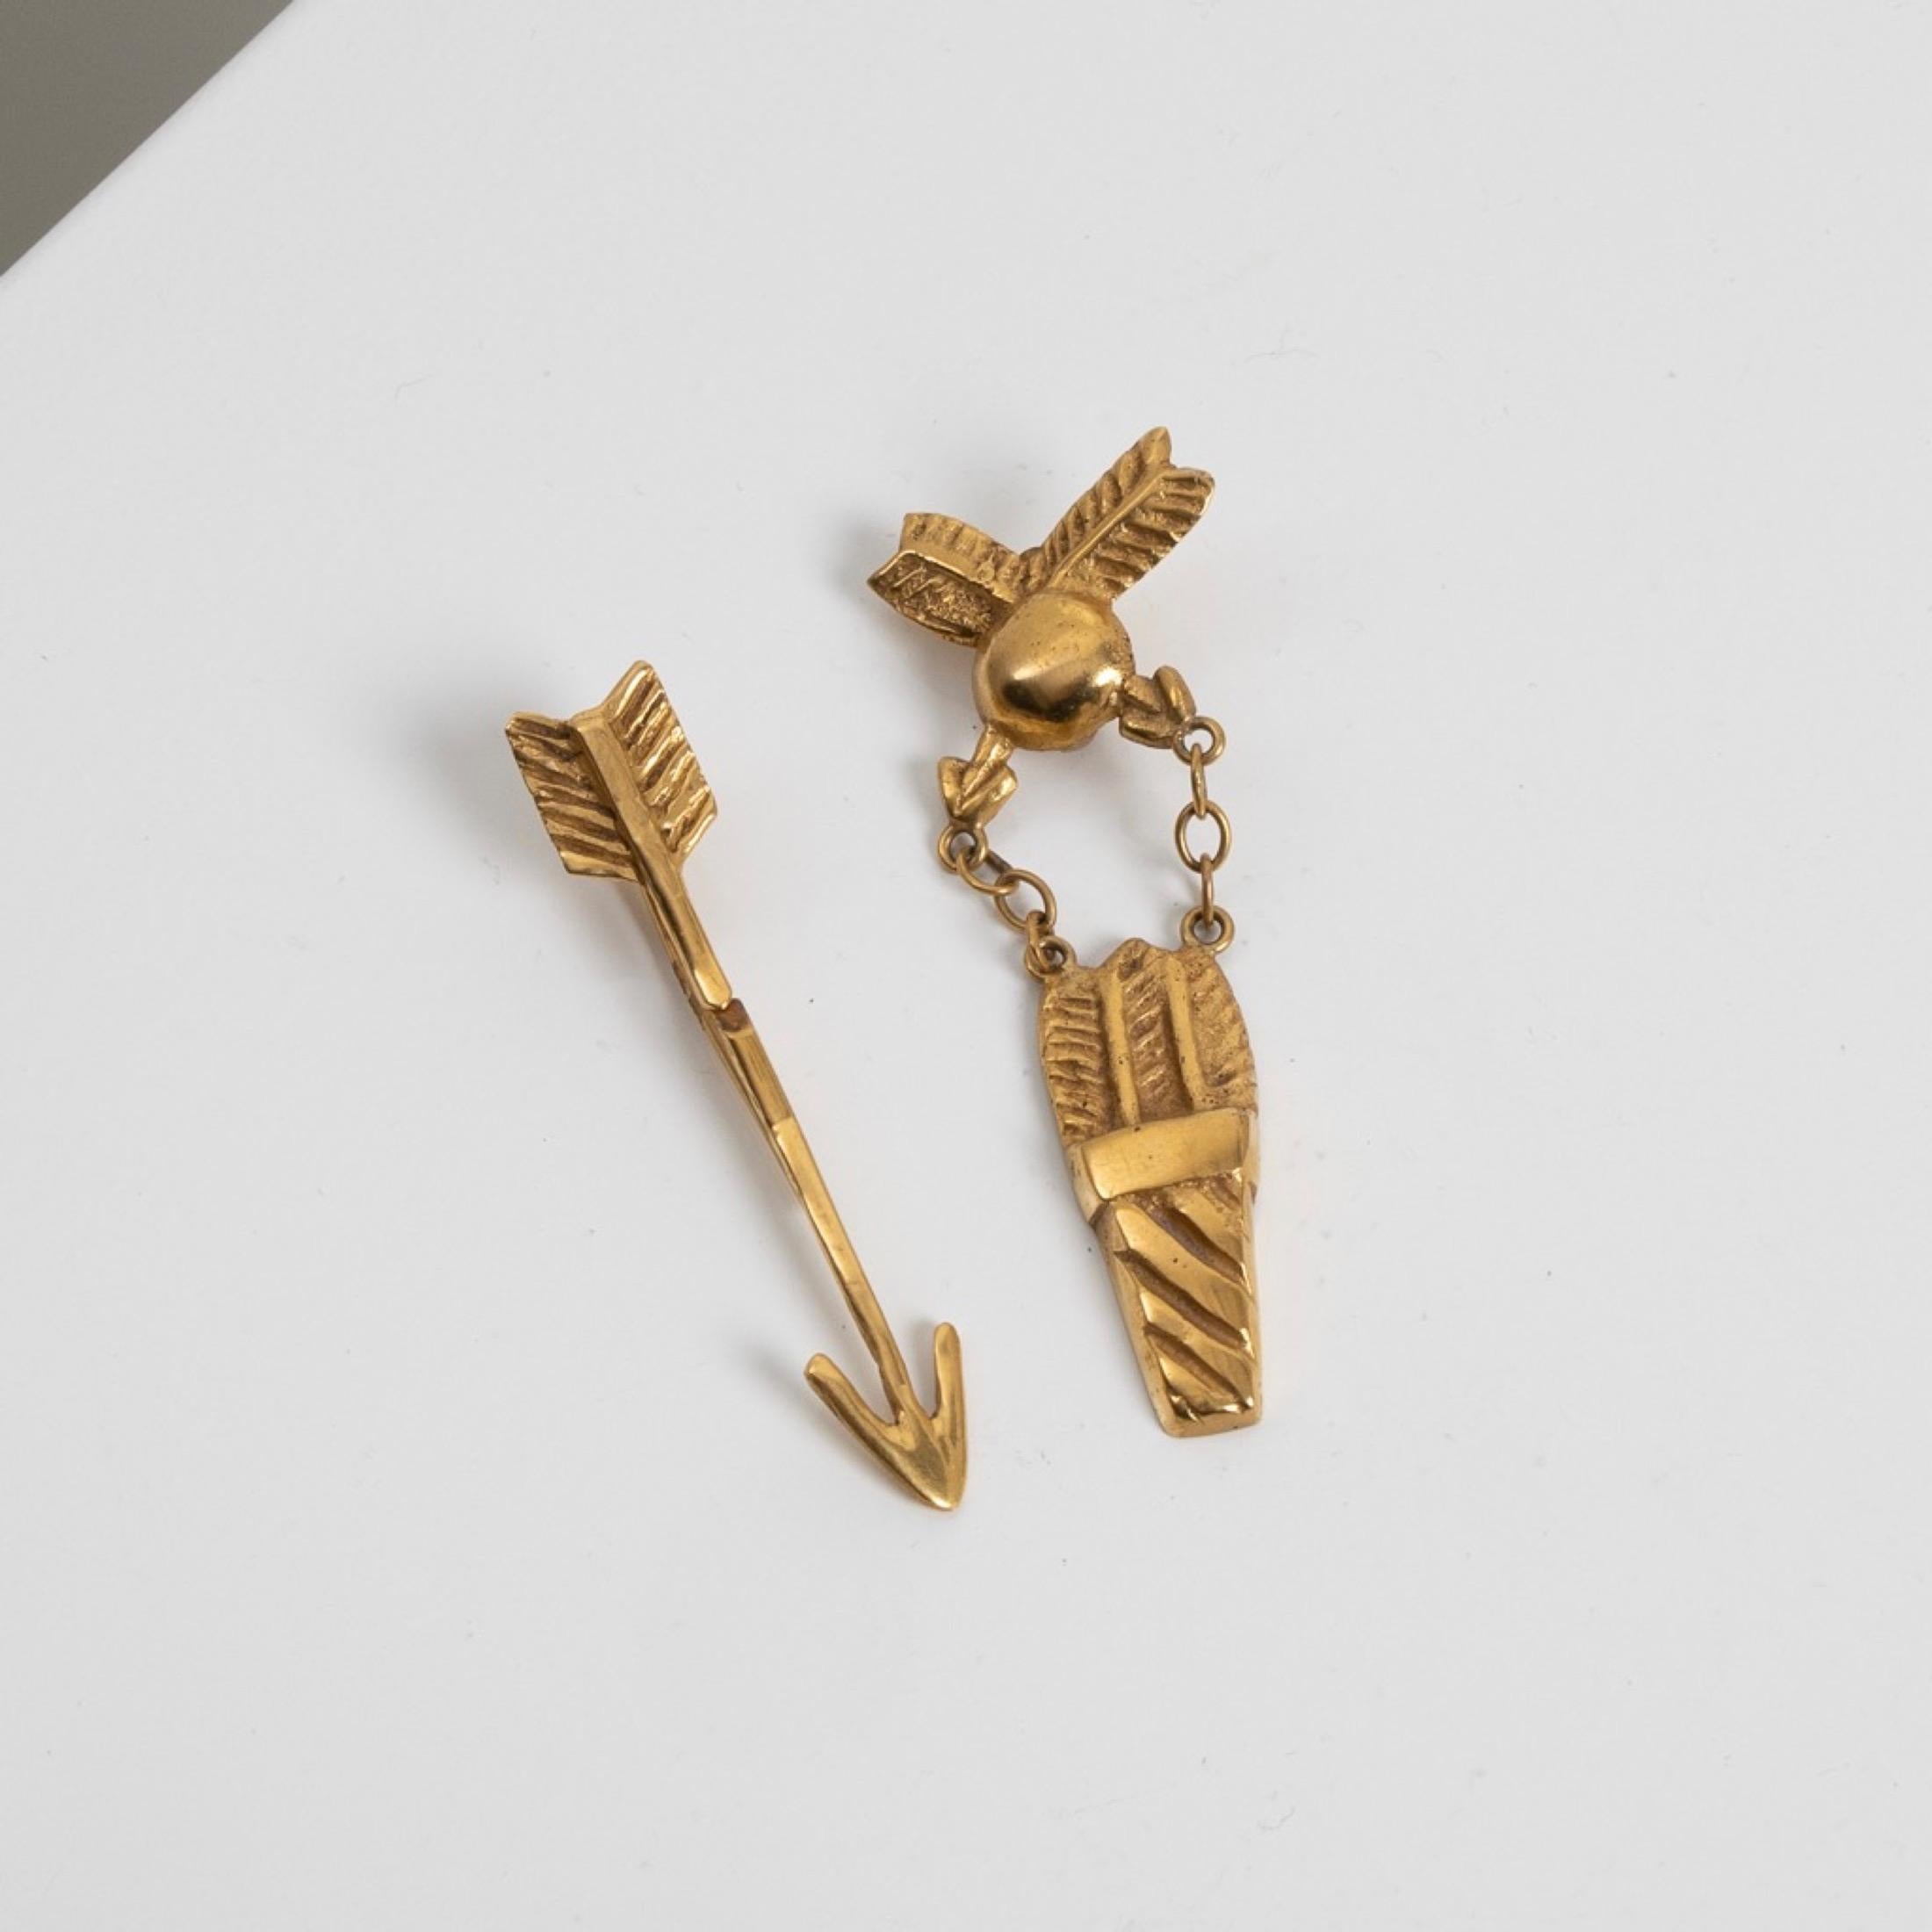 About Flèche et Carquois (Arrow and Quiver) by Line Vautrin
Rare pair of gilt bronze earrings.
One of the earrings represents an arrow which is placed on the side of the ear and gives the illusion of an arrow which would pierce the ear.
The